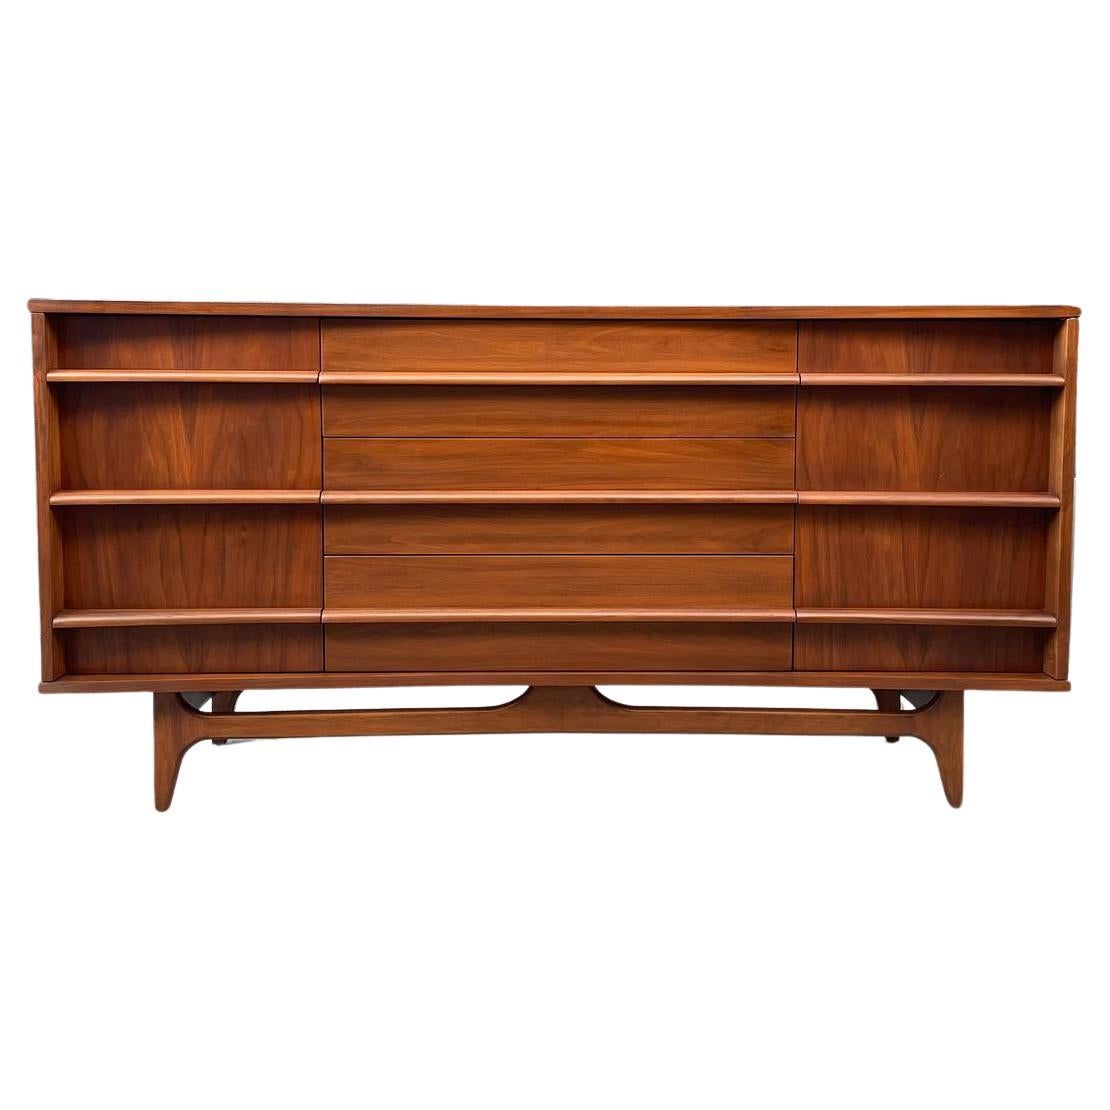 Newly Refinished - Mid-Century Modern Curved-Front Walnut Credenza